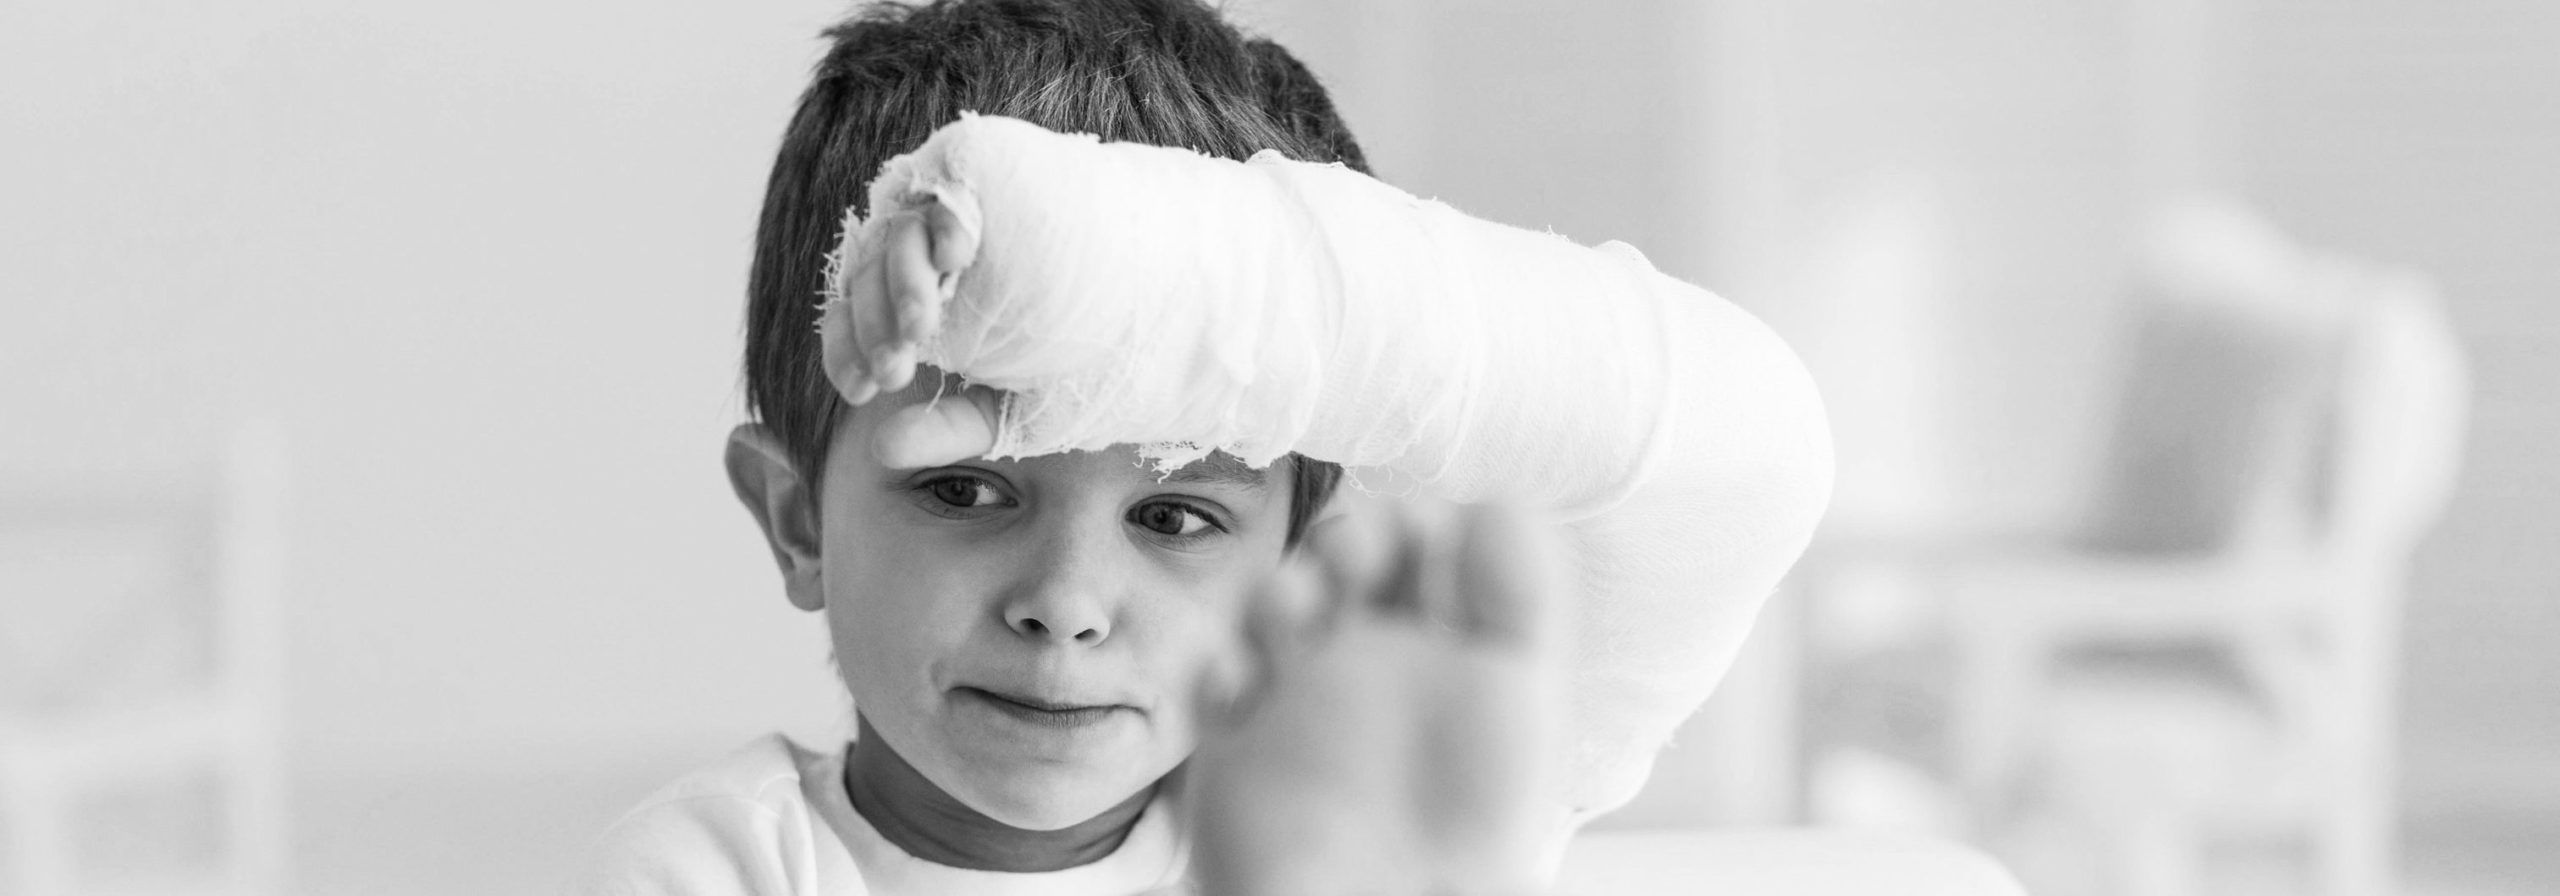 Child with an Injury